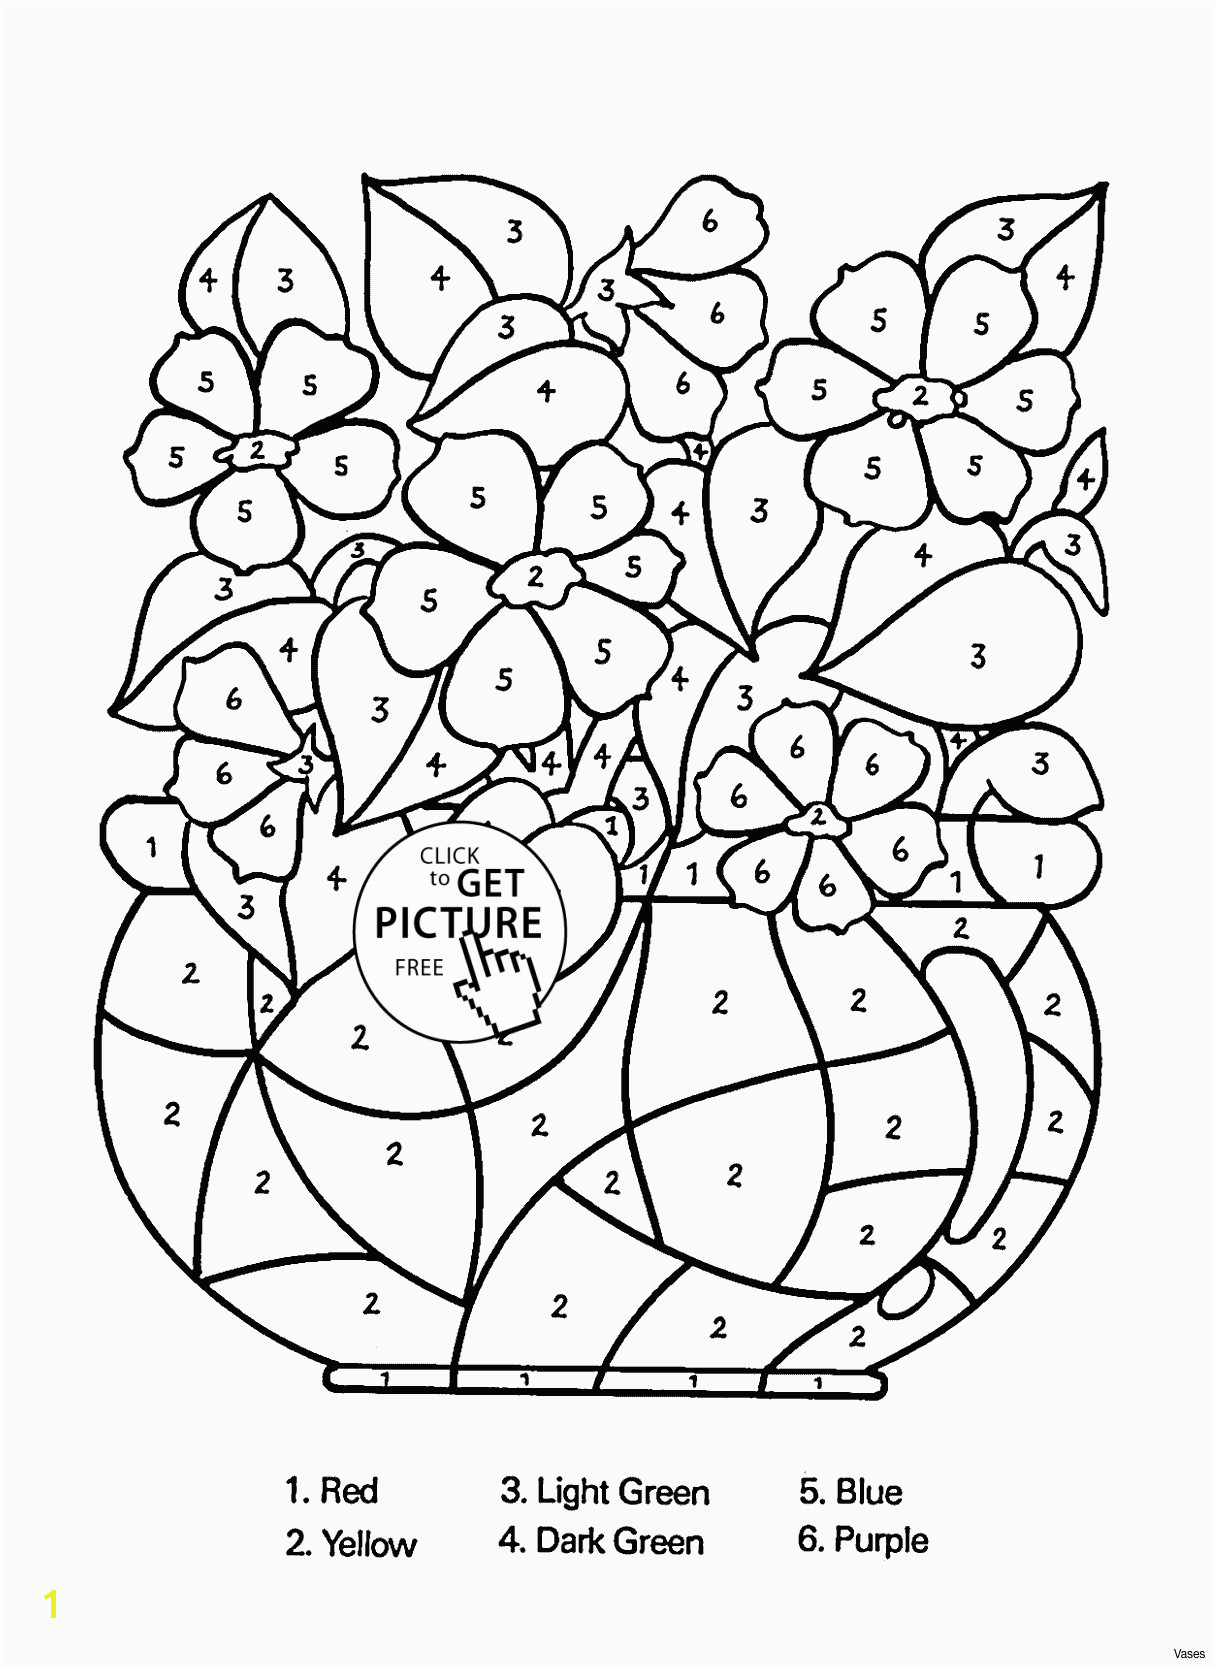 Best of Rock Coloring Pages Collection 14 n Cool Vases Flower Vase Coloring Page